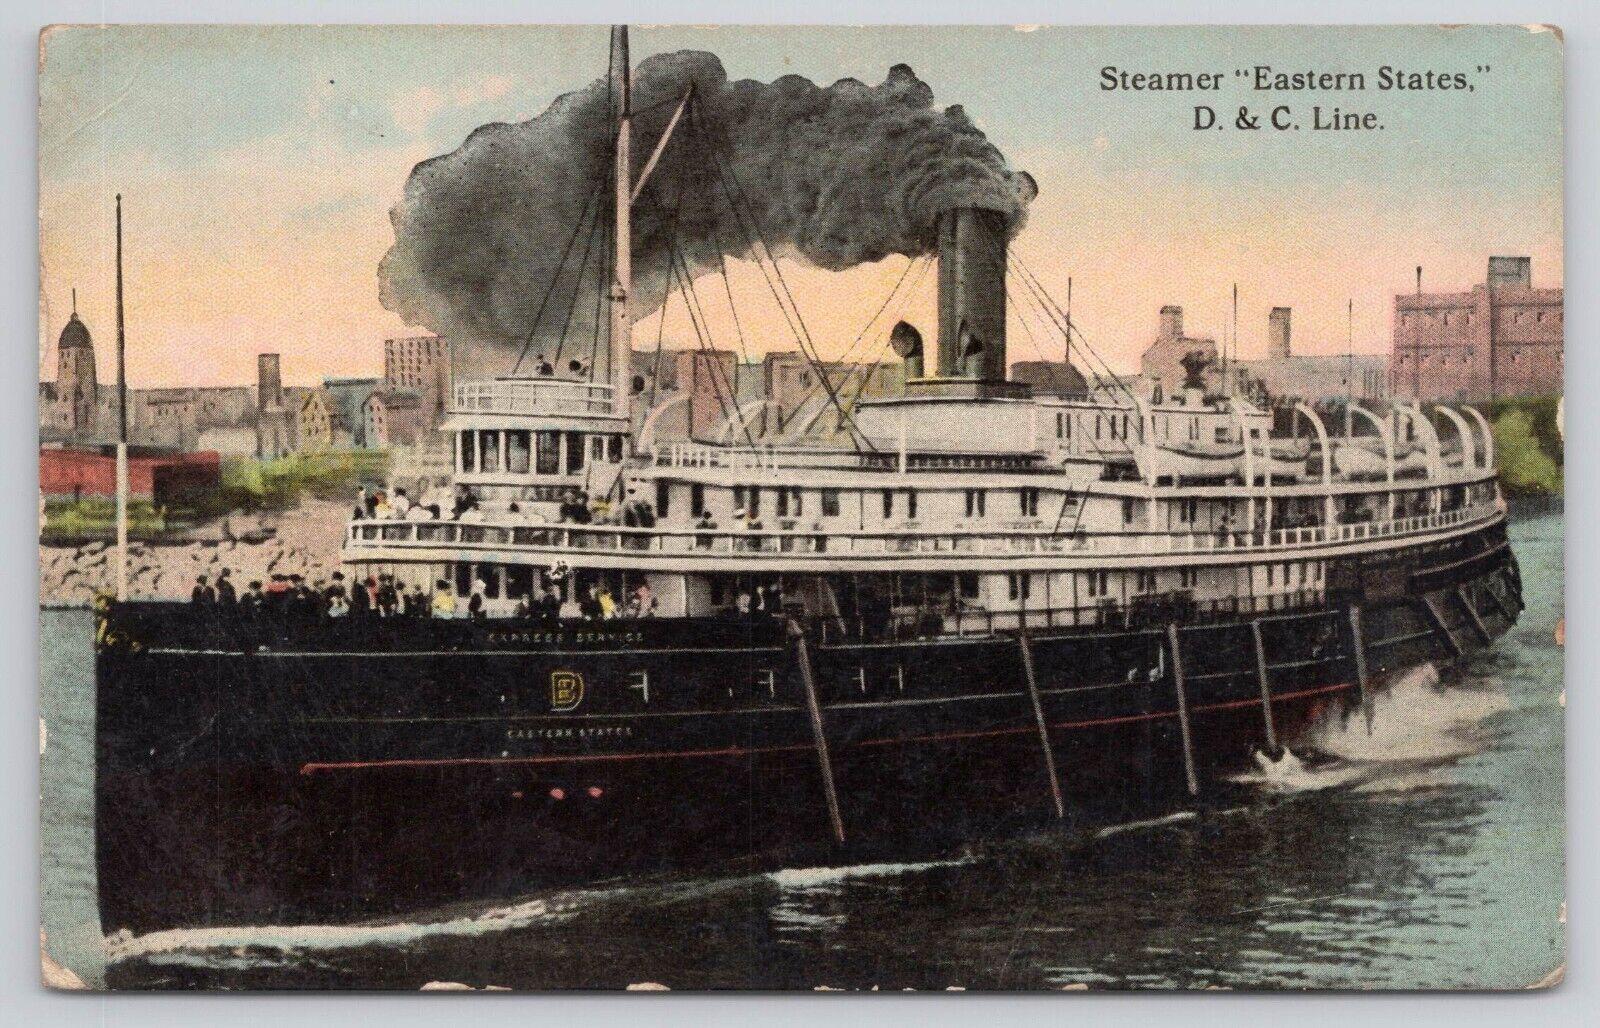 1912 Steamer S.S. Eastern States Steamship Cleveland, Ohio Antique Postcard